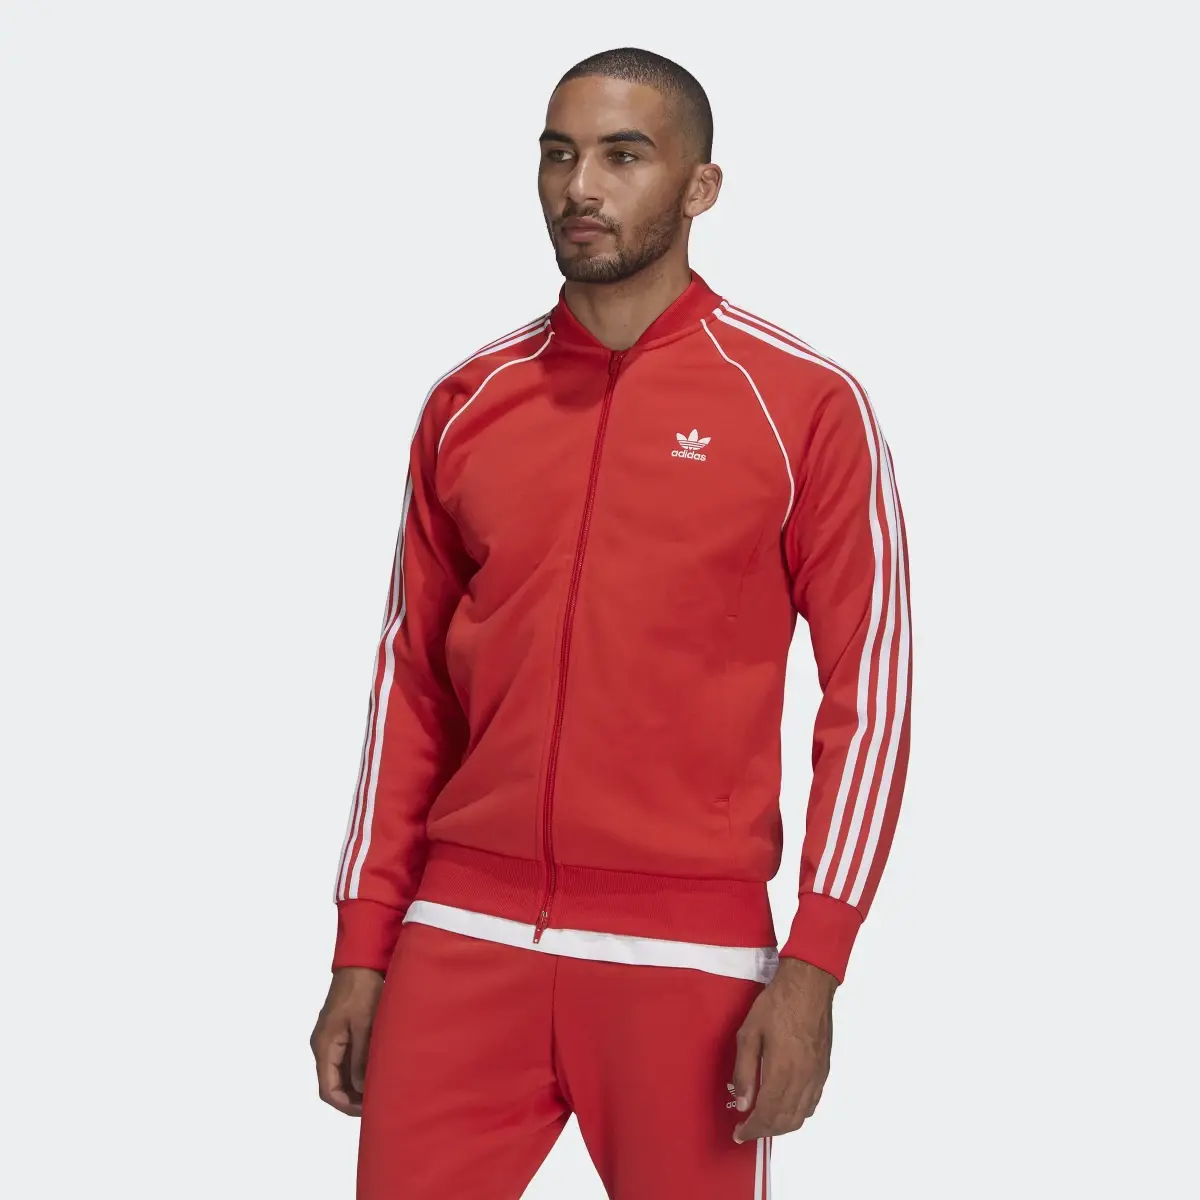 Adidas SST Track Top. 2